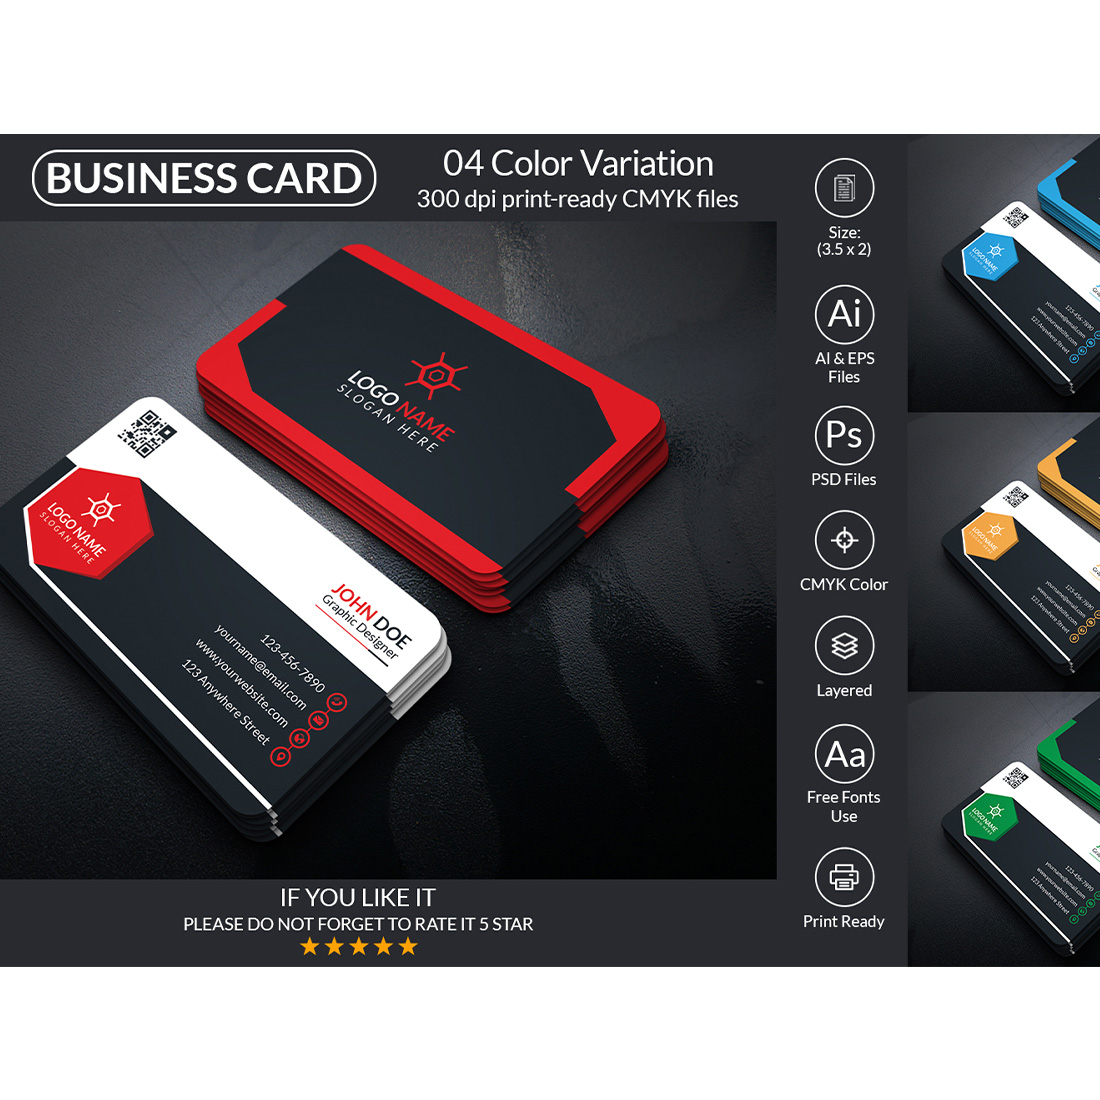 Corporate Business Card Design Template cover image.